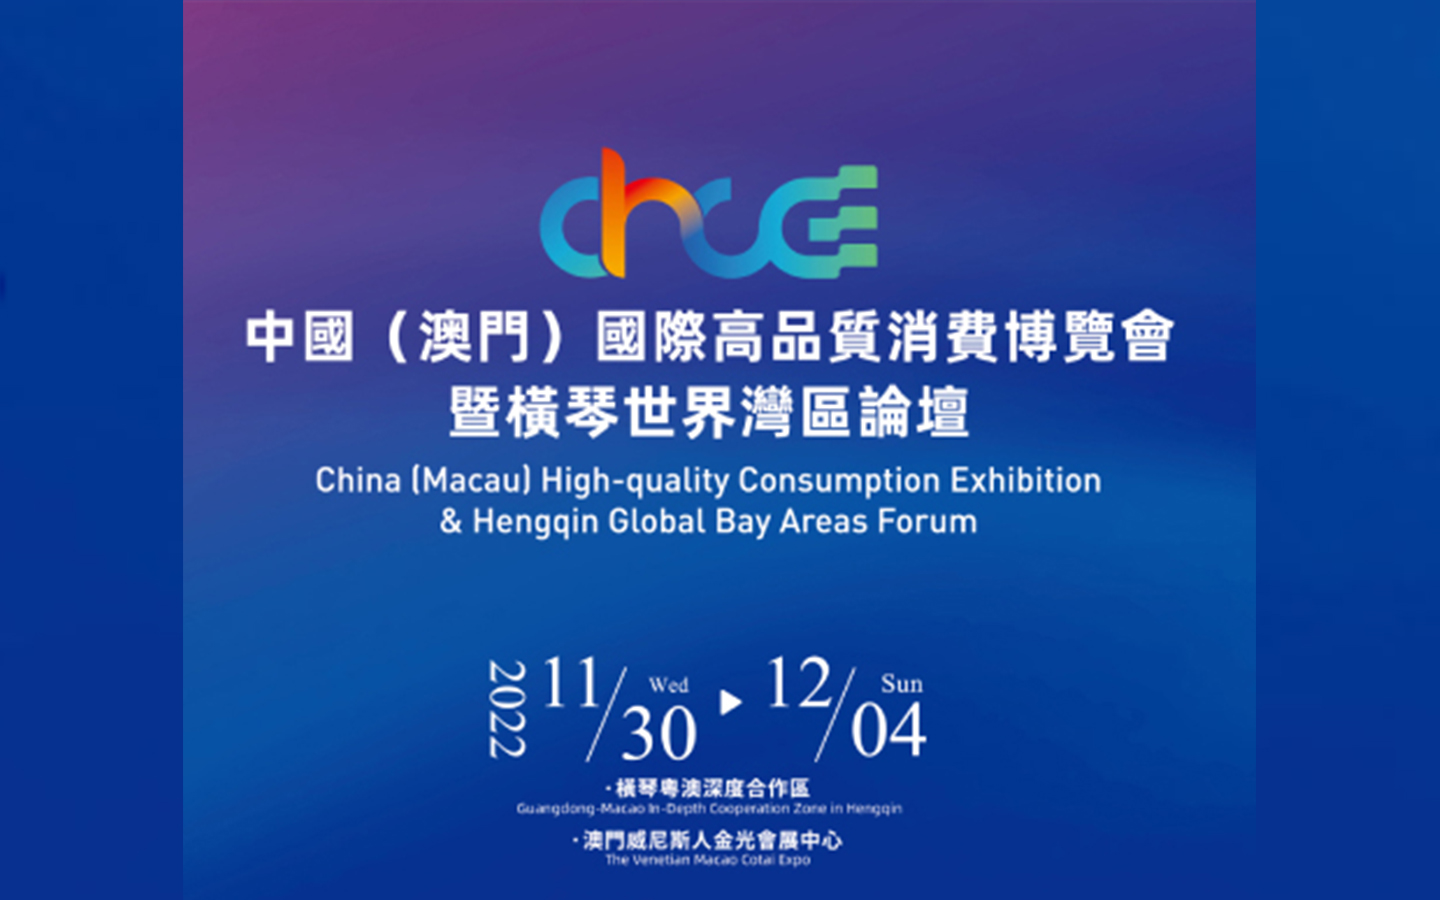 China (Macao) High-quality Consumption Exhibition (CHCE)